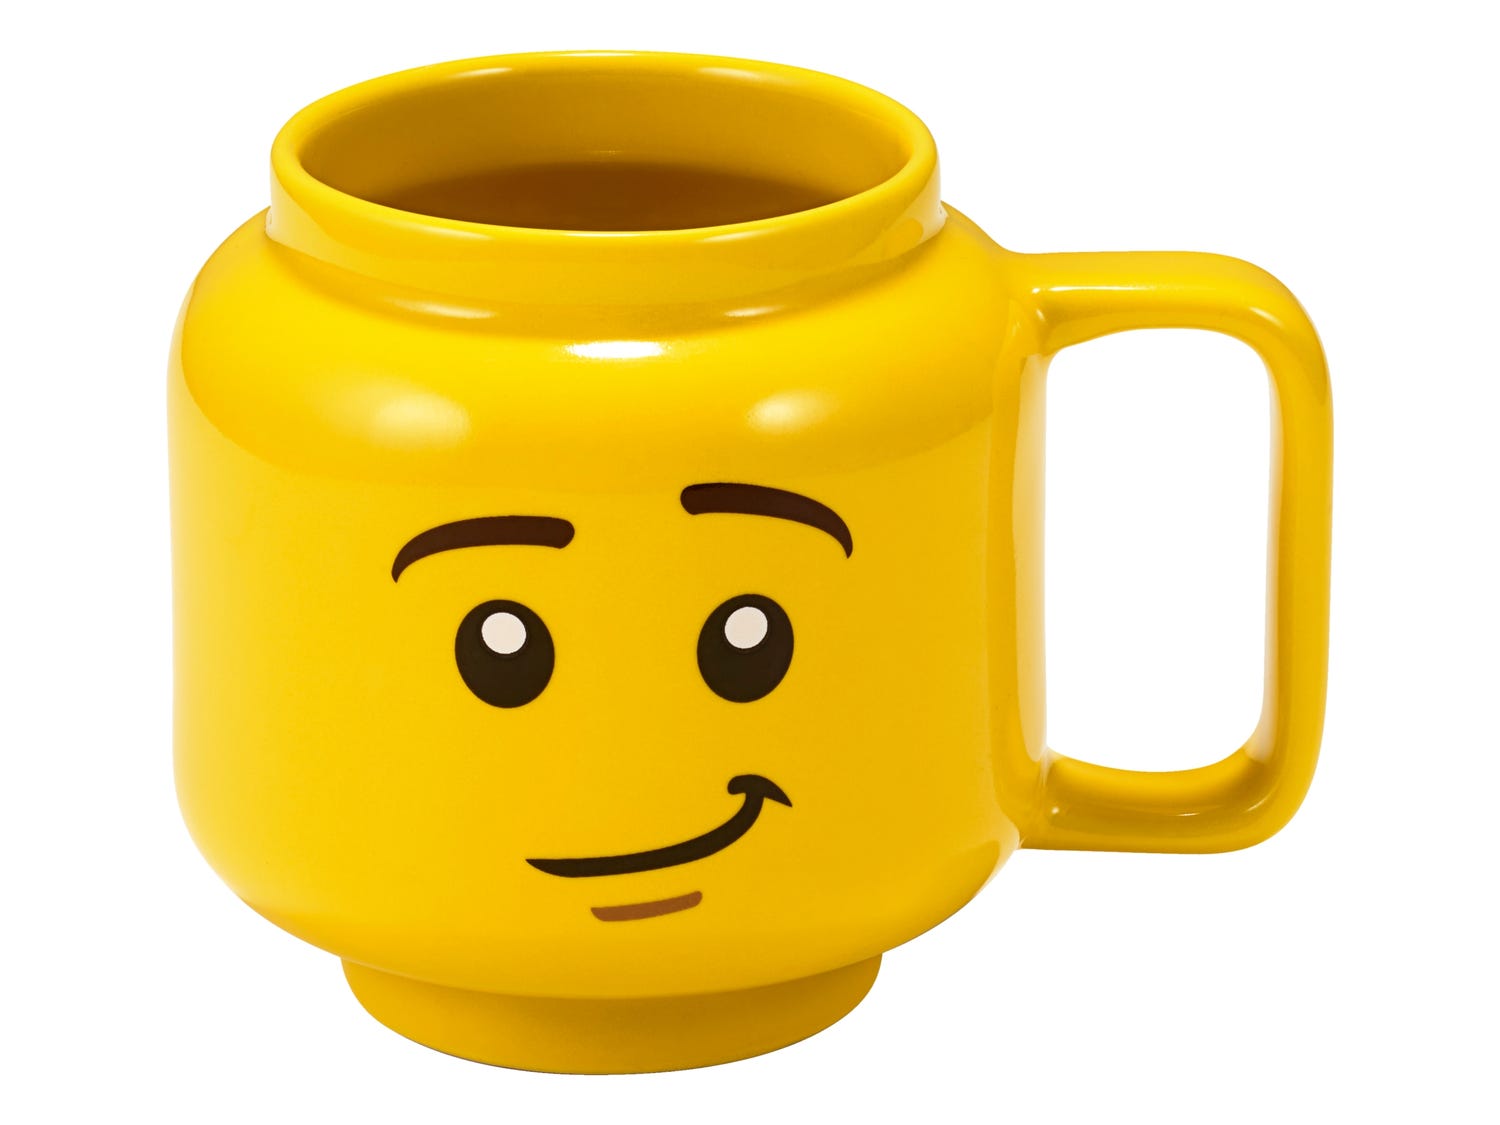 LEGO® Minifigure Ceramic Mug 853910 | Other | Buy at the Official LEGO® Shop US